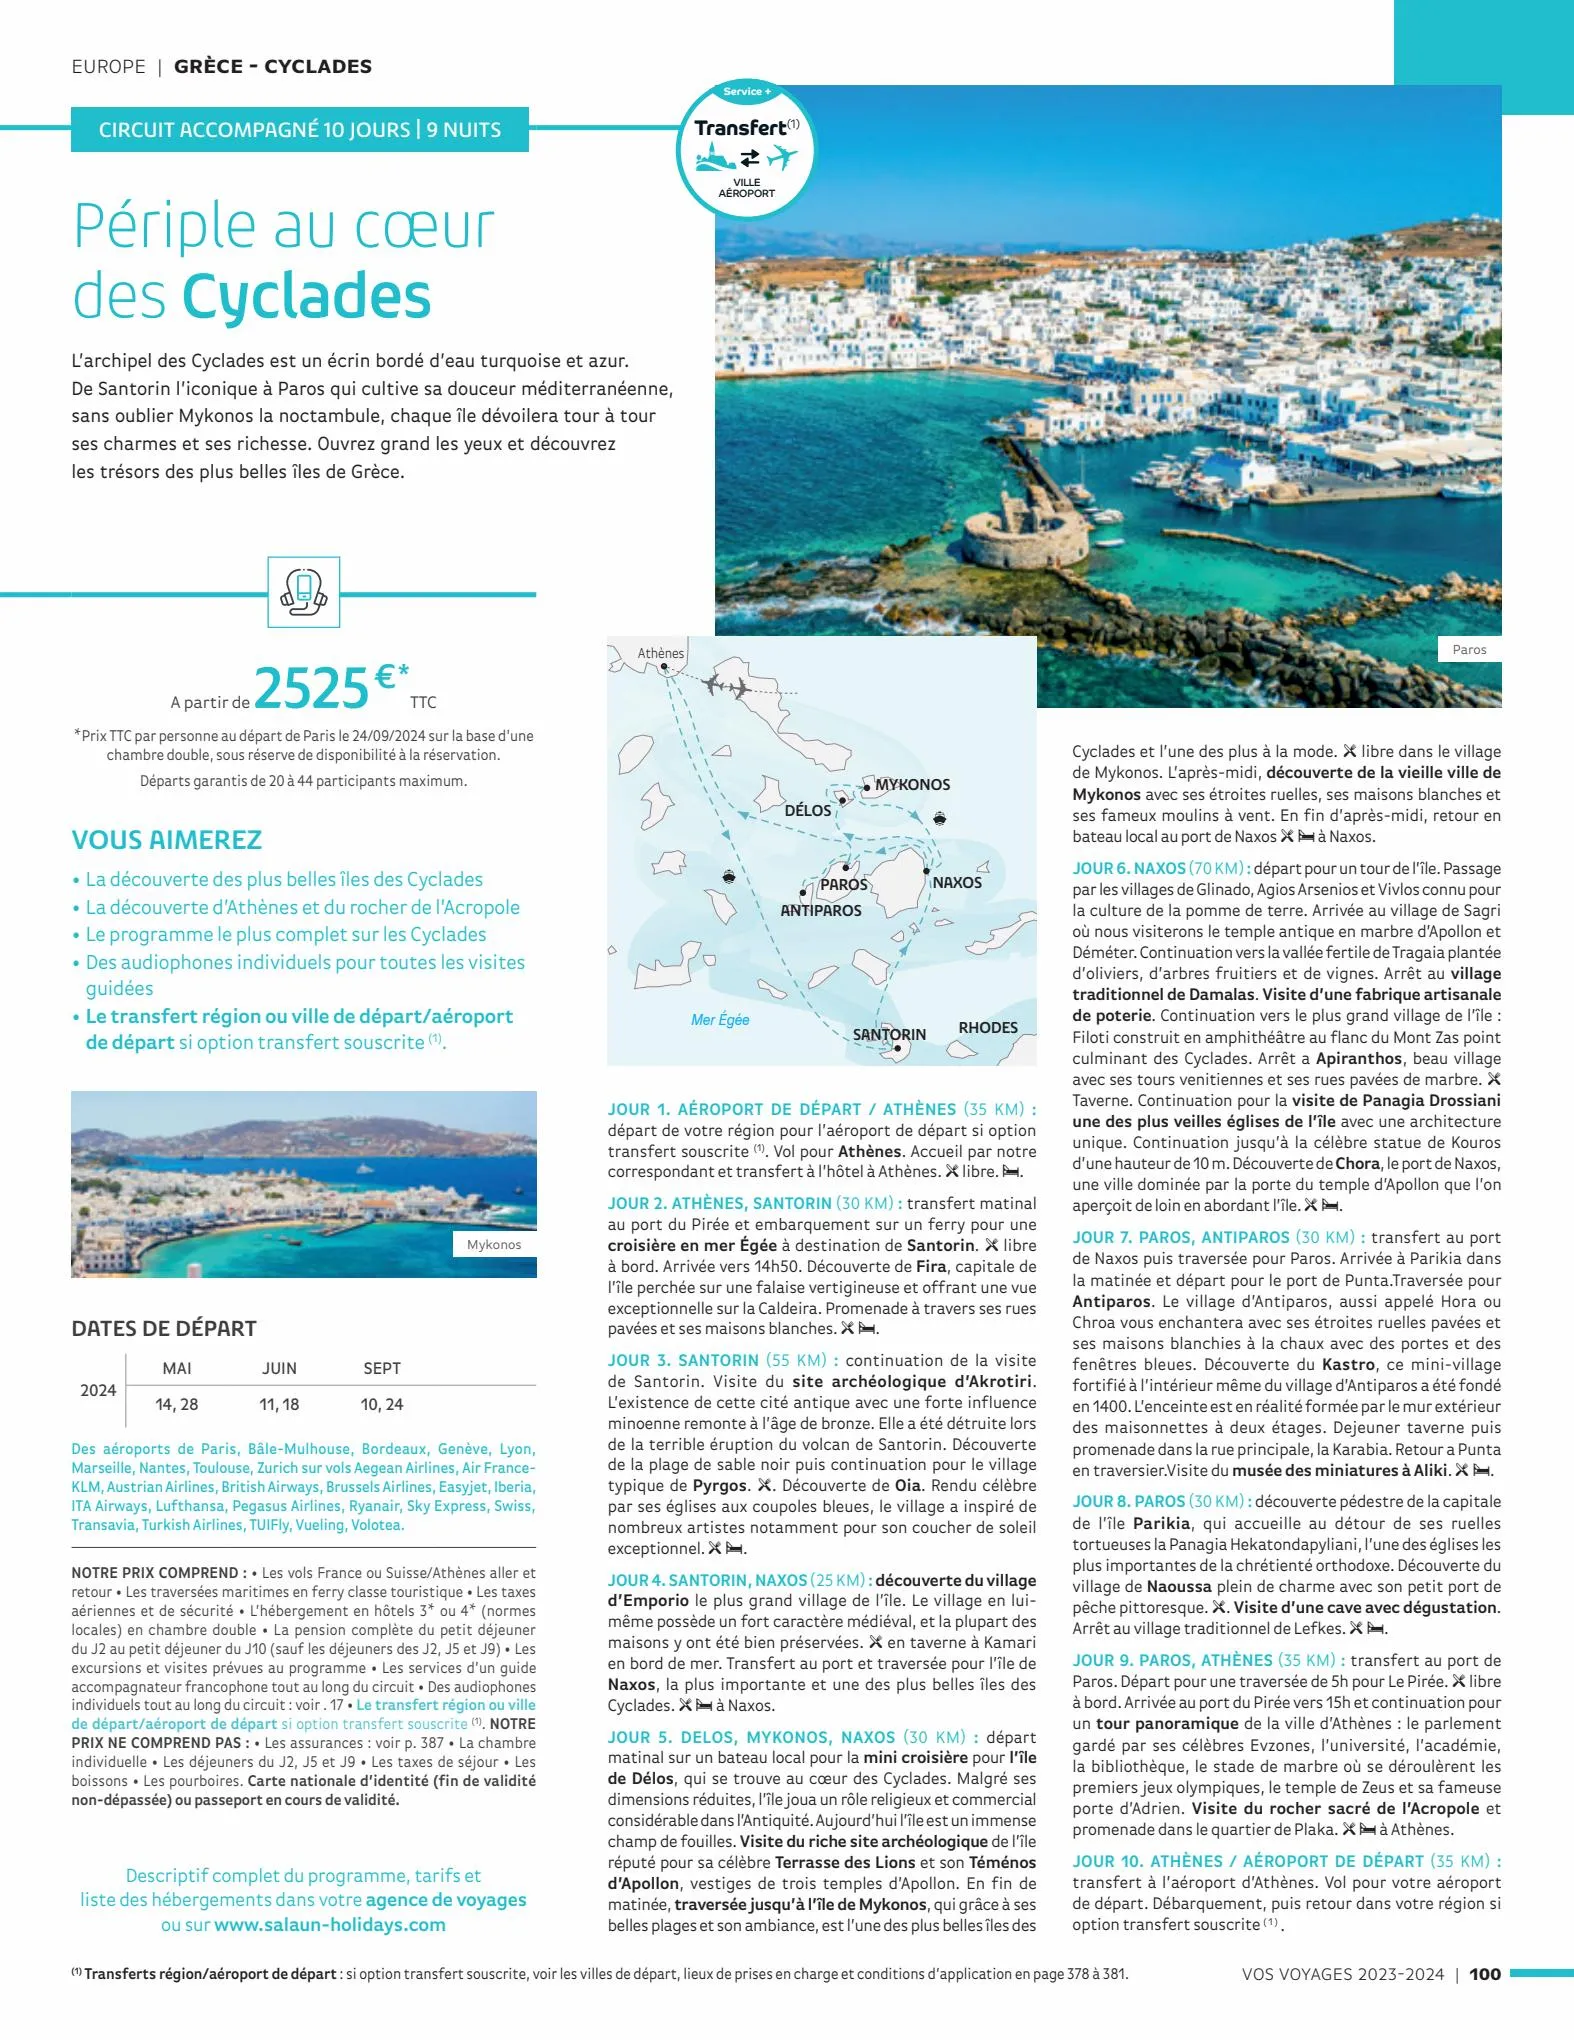 Catalogue Vos voyages 2023-2024, page 00100